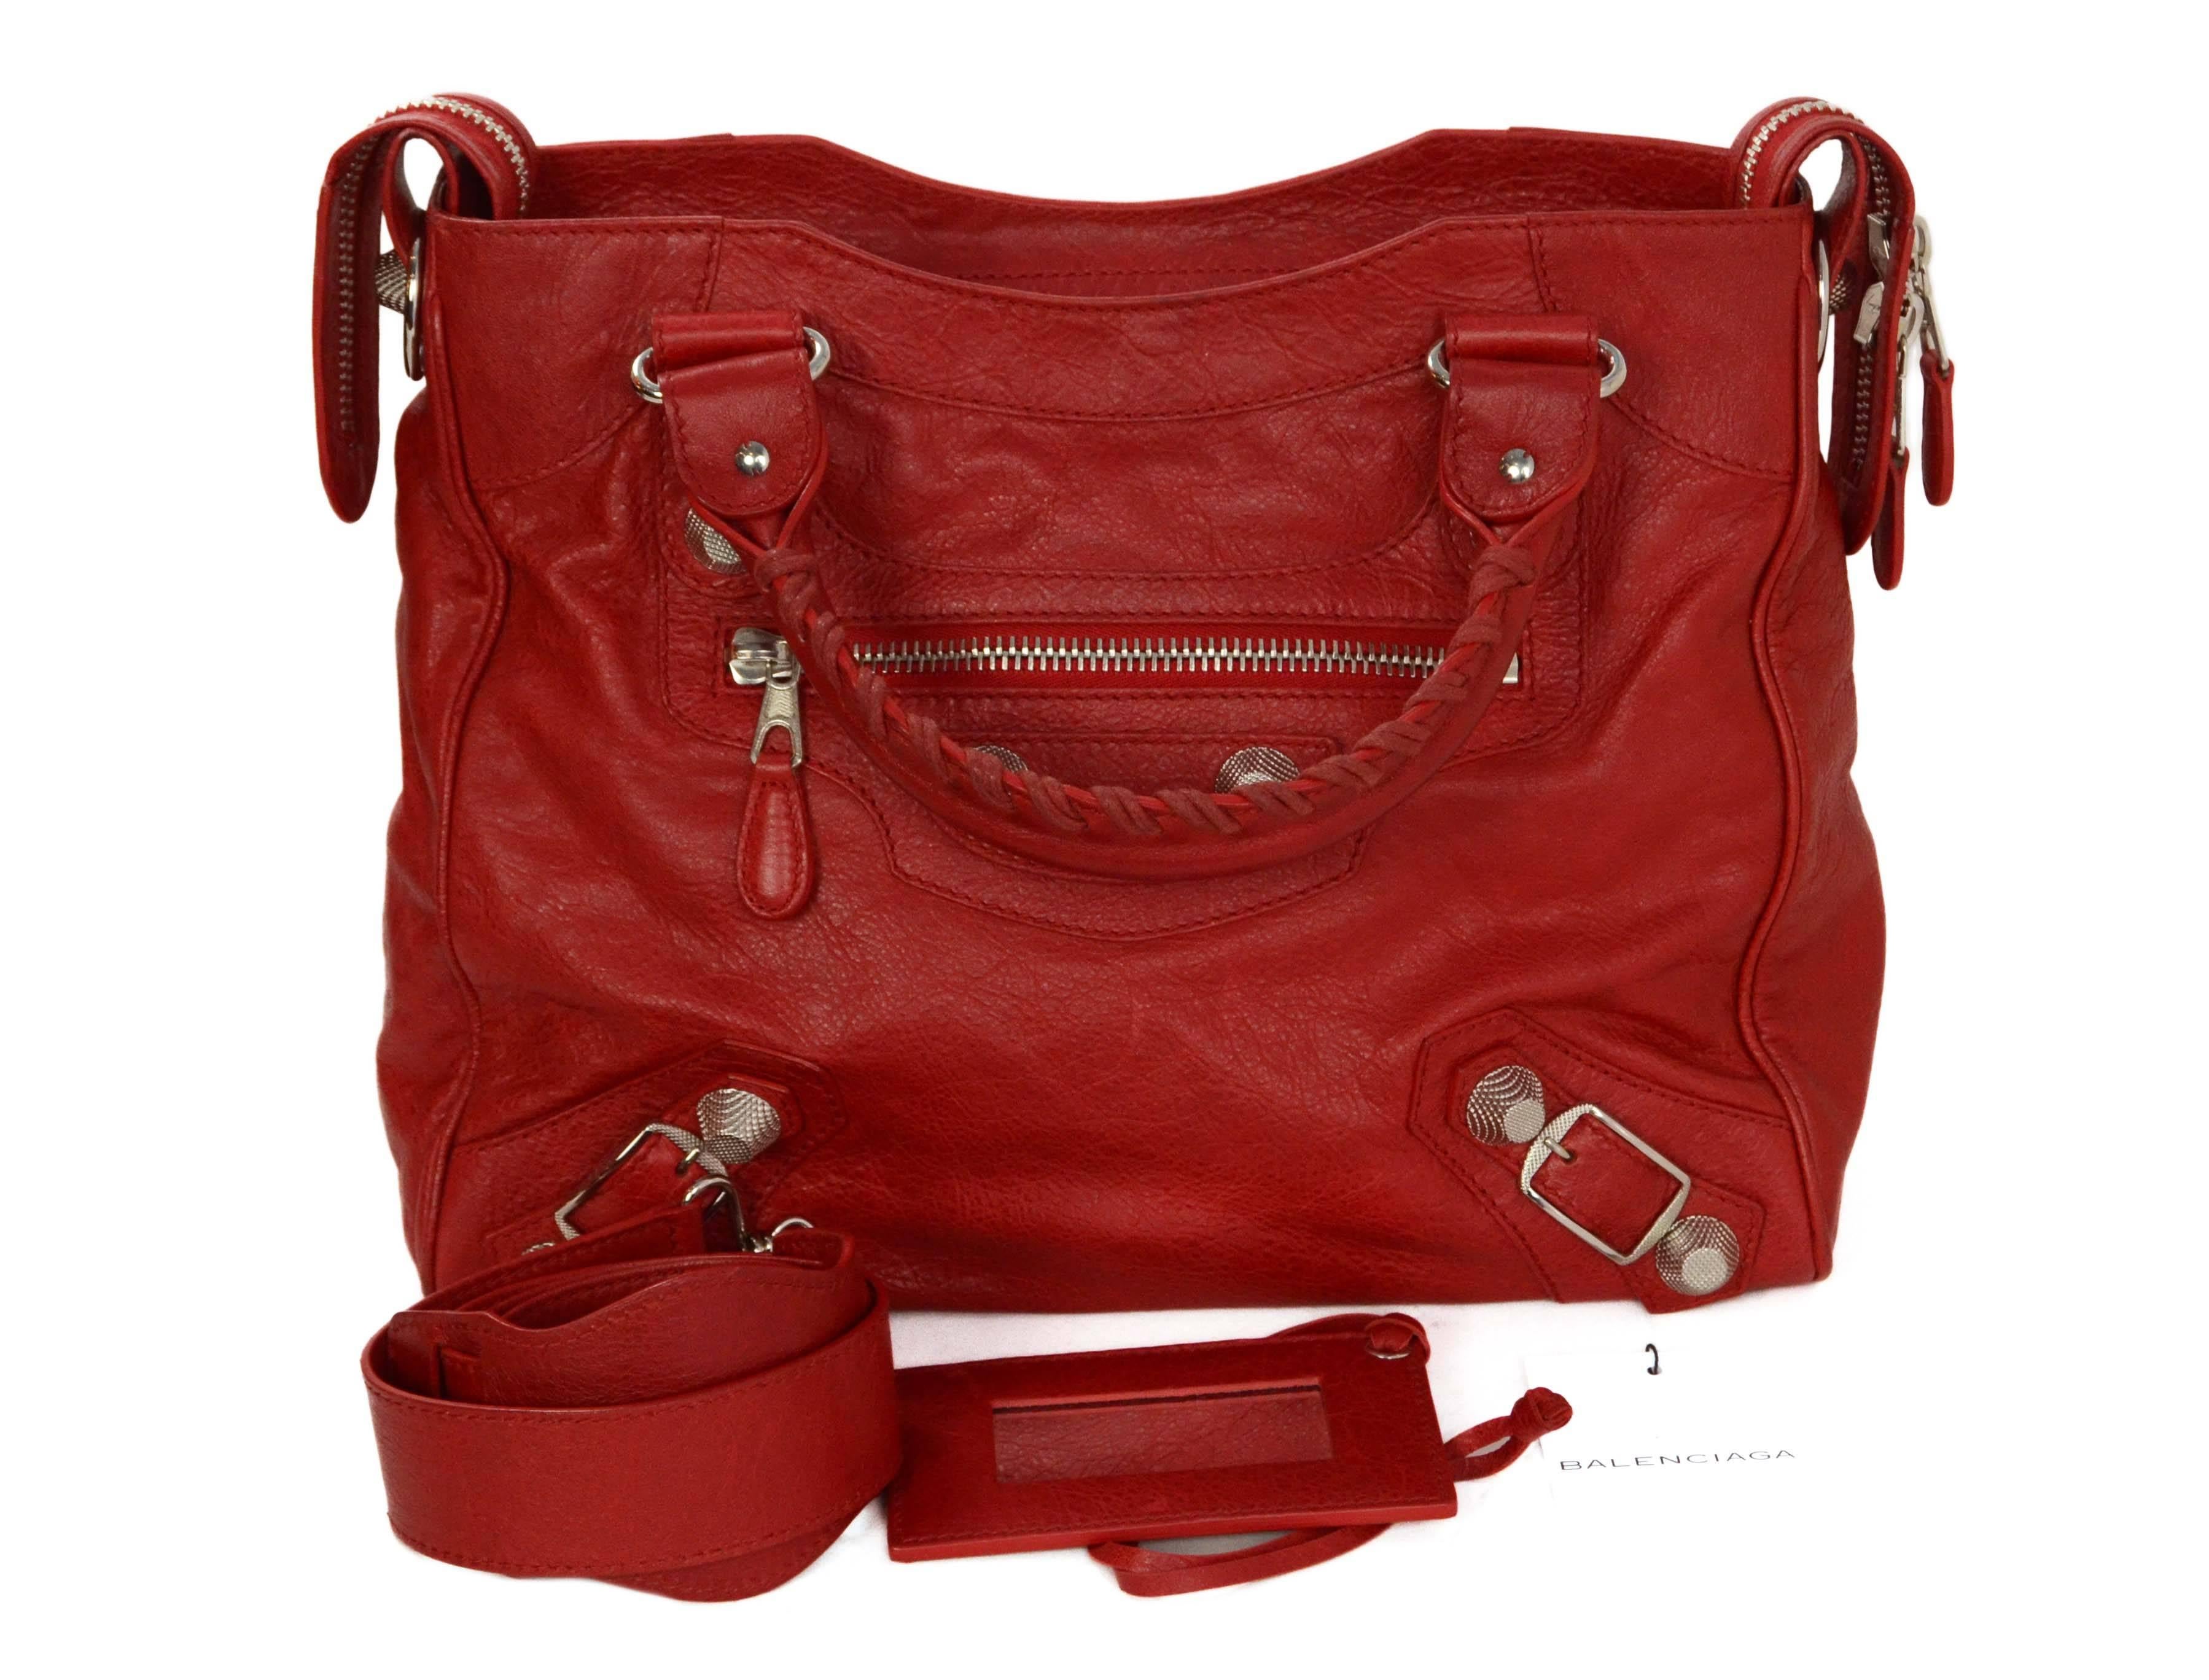 Balenciaga Red Distressed Leather Giant 21 Velo Bag SHW 2